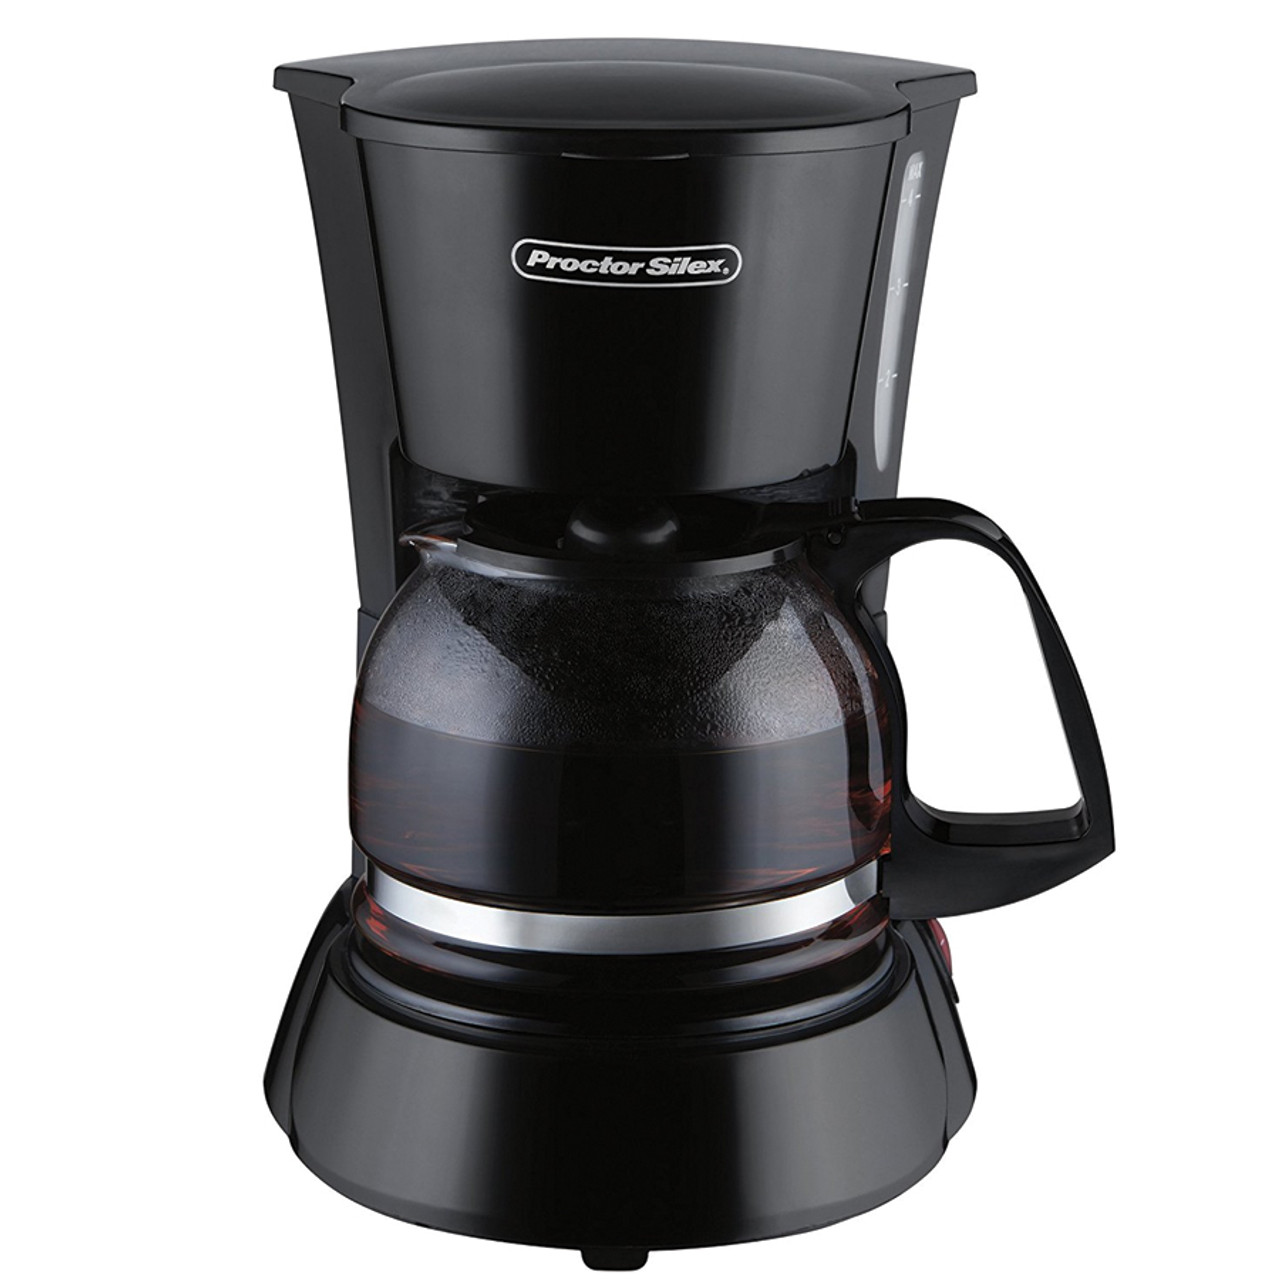 Proctor Silex Pause & Serve 4 Cup Coffee Maker, Black - The Online